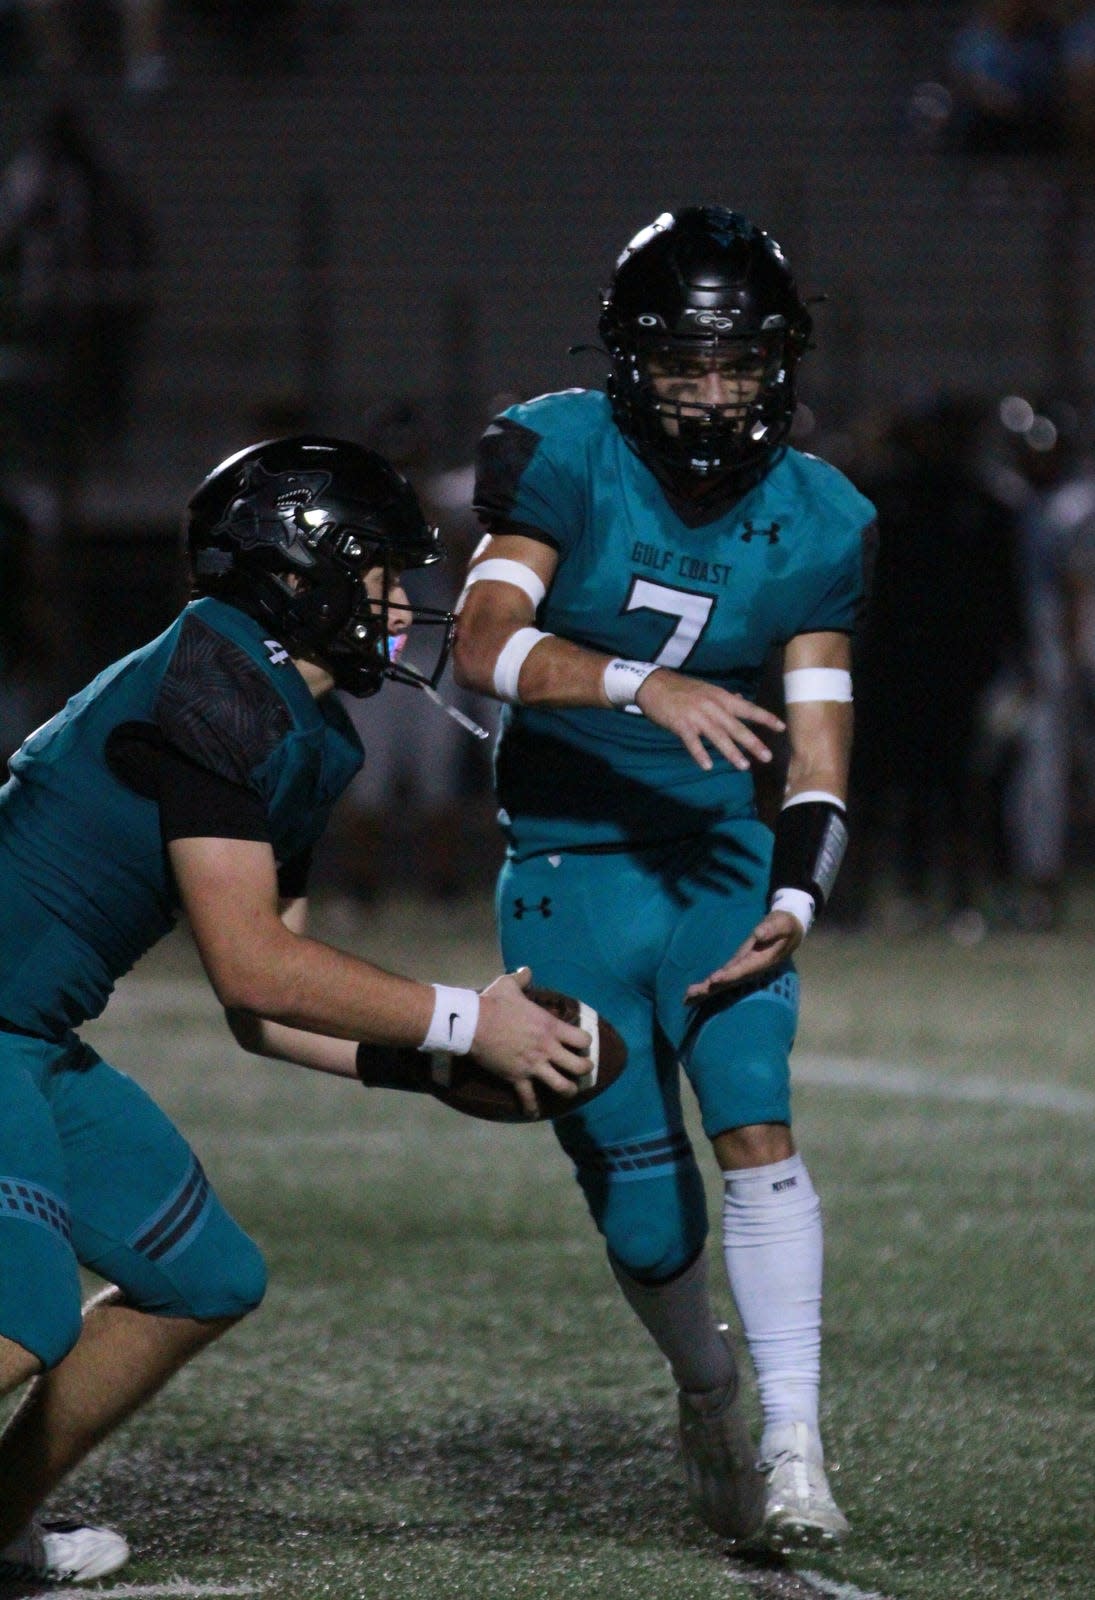 The West Broward Bobcats visited the Gulf Coast High School Sharks for a Friday football matchup October 13, 2023. Gulf Coast defeated West Broward with a final score of 19-21.